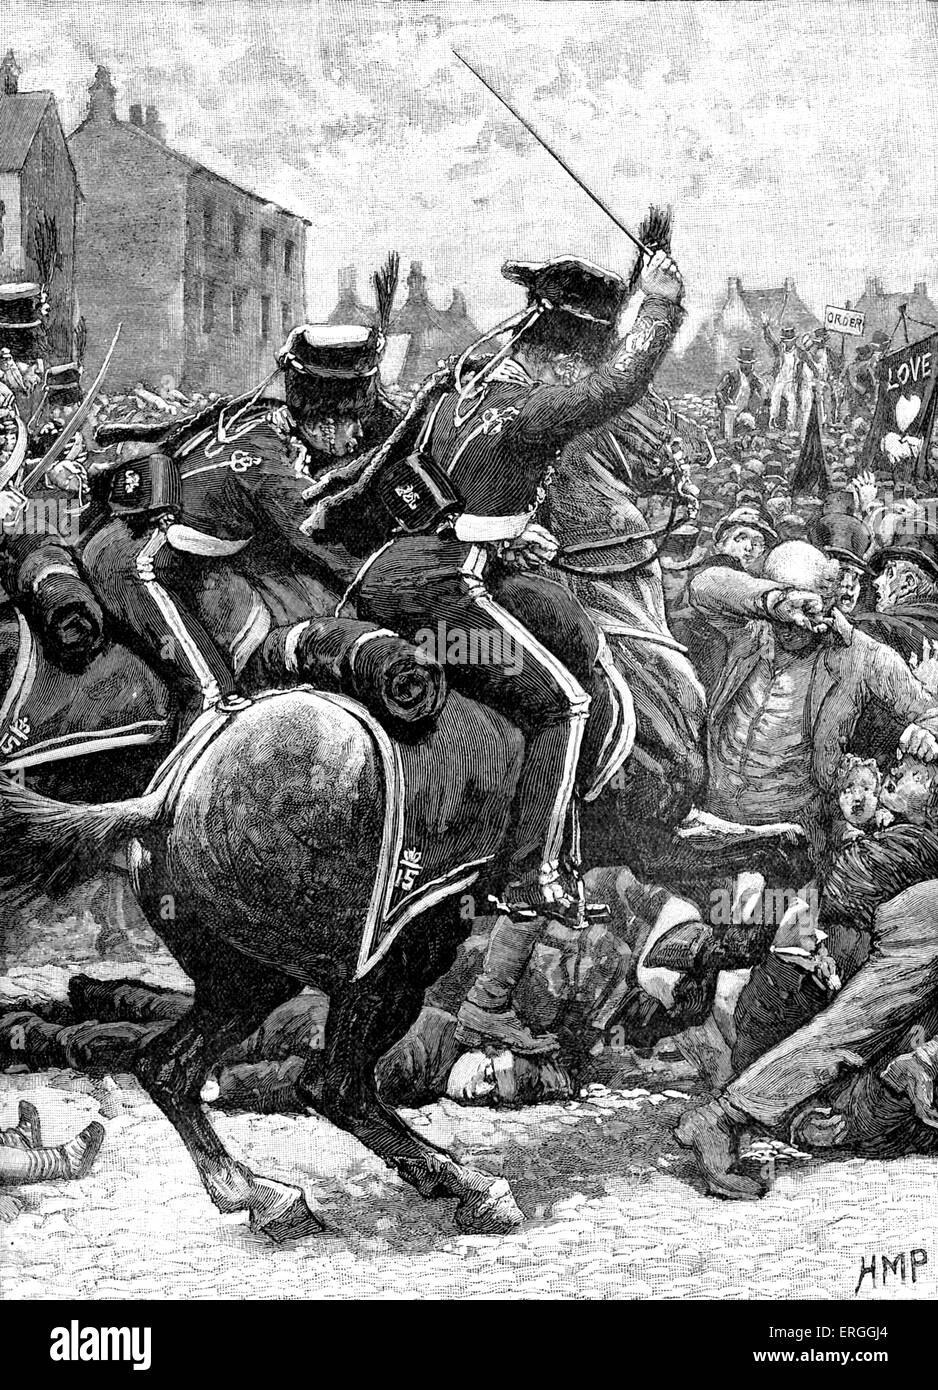 Peterloo Massacre, St Peter's Field, Manchester, UK 16 August 1819. Cavalry charged at a crowd who had gathered to demand reform of parliamentary represenation. Stock Photo